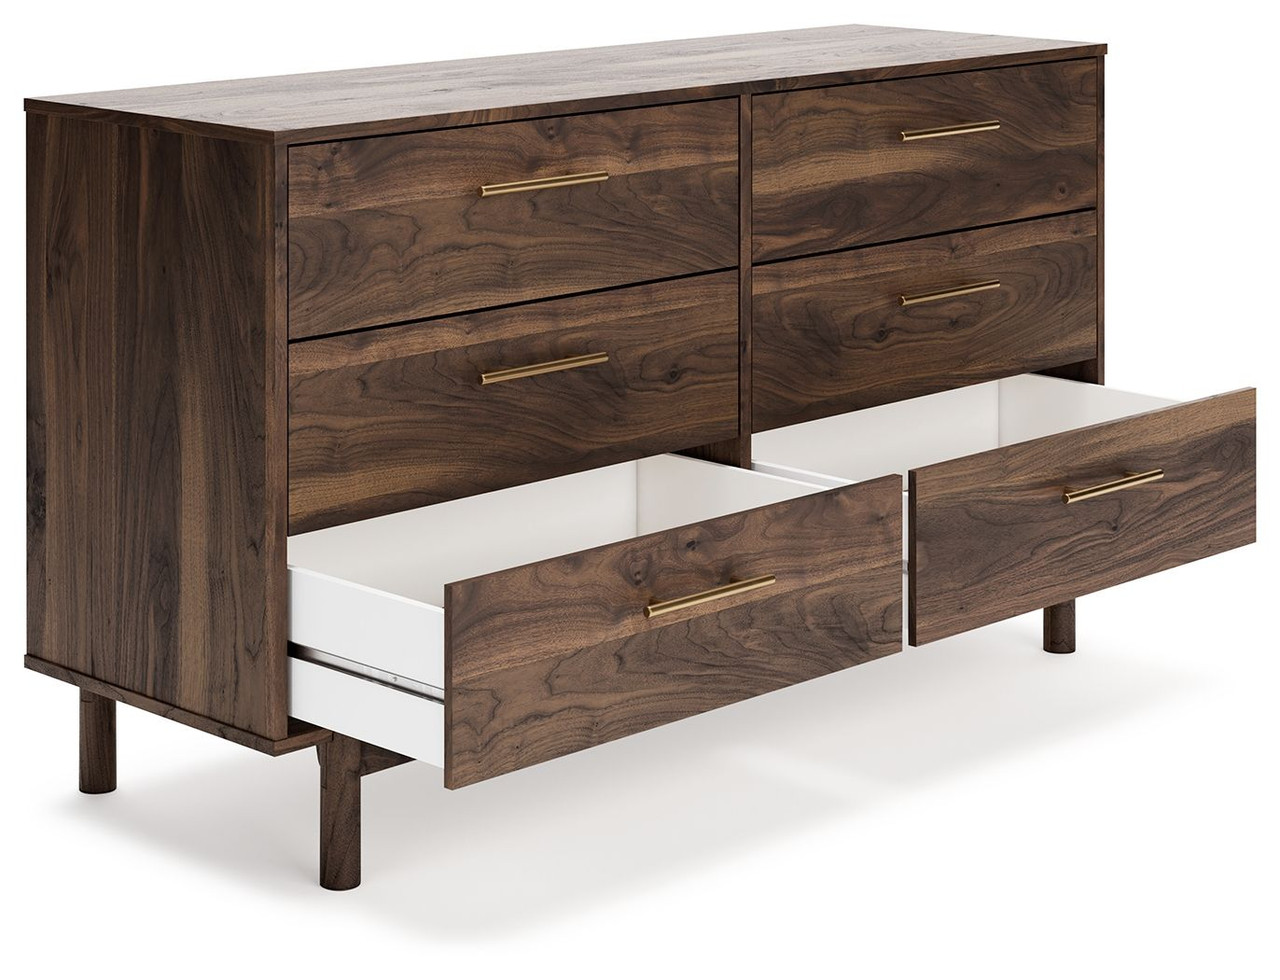 The Calverson Mocha Six Drawer Dresser Medium is available at Select